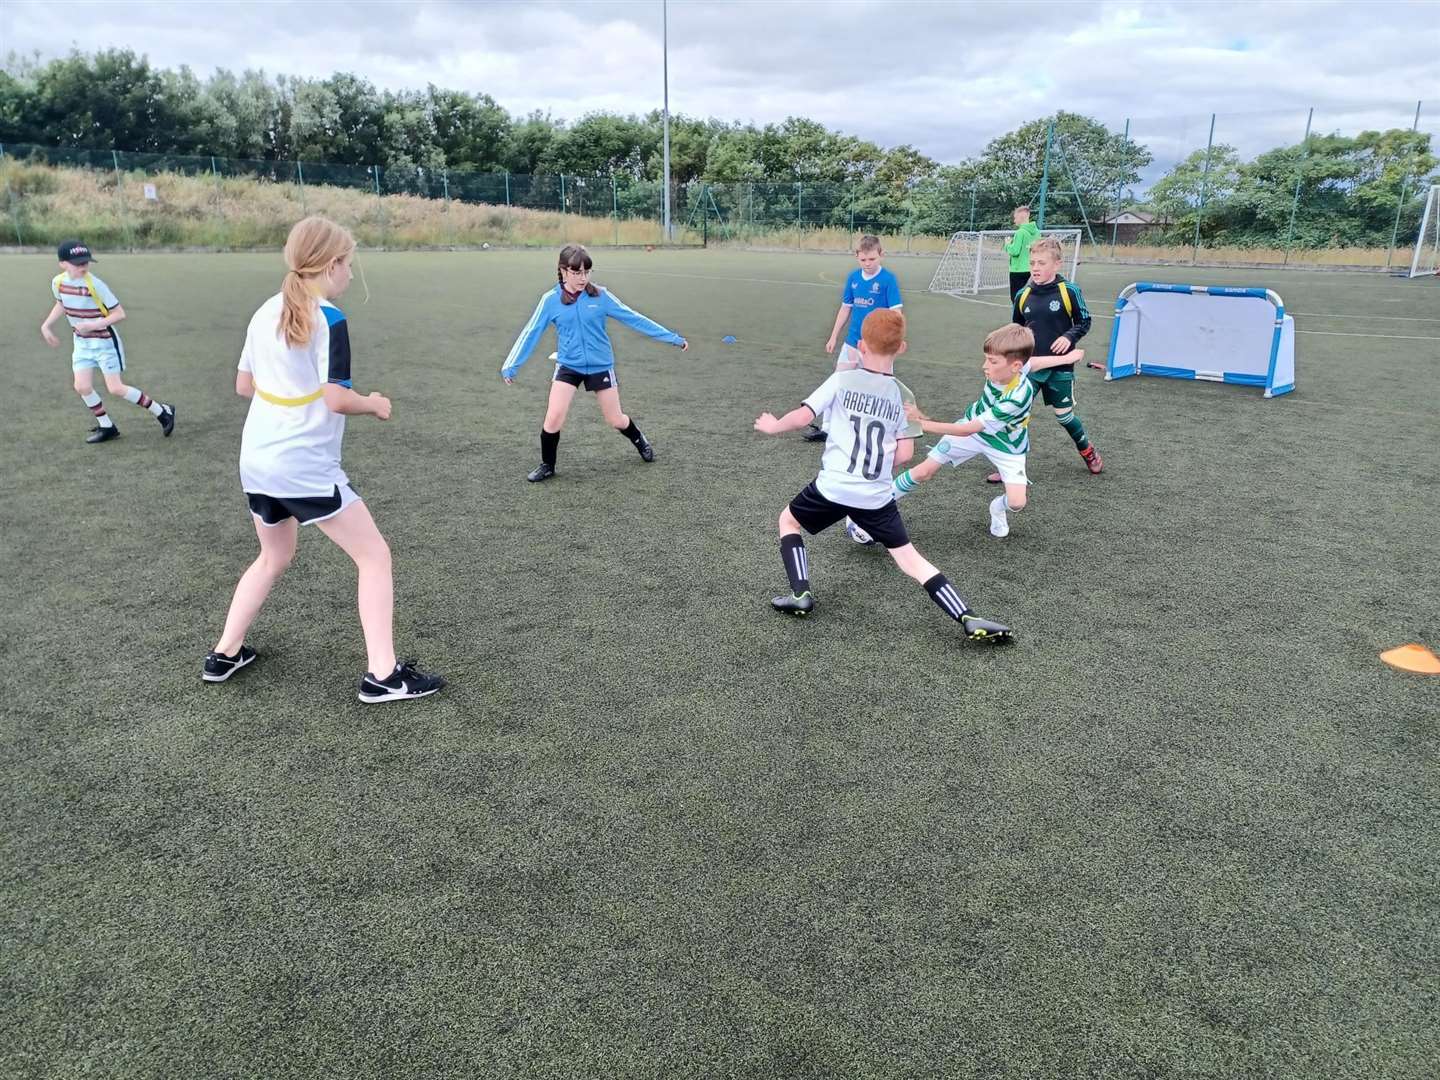 In action on the mini football pitch.